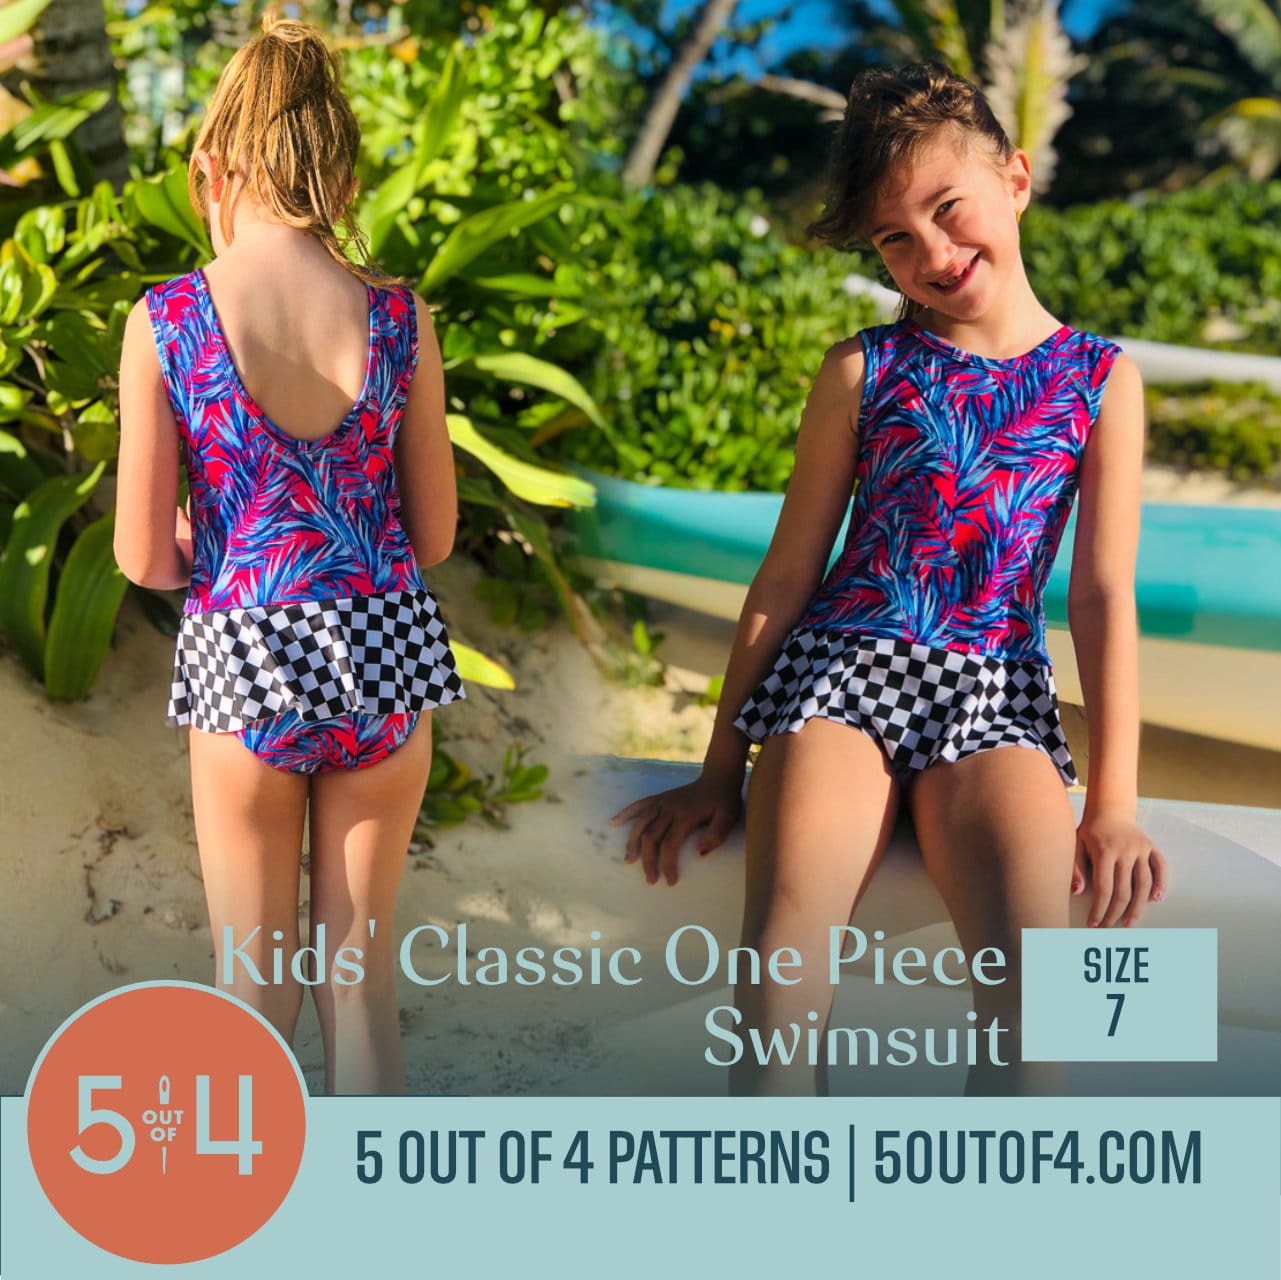 Classic One Piece Swimsuit Bundle - 5 out of 4 Patterns